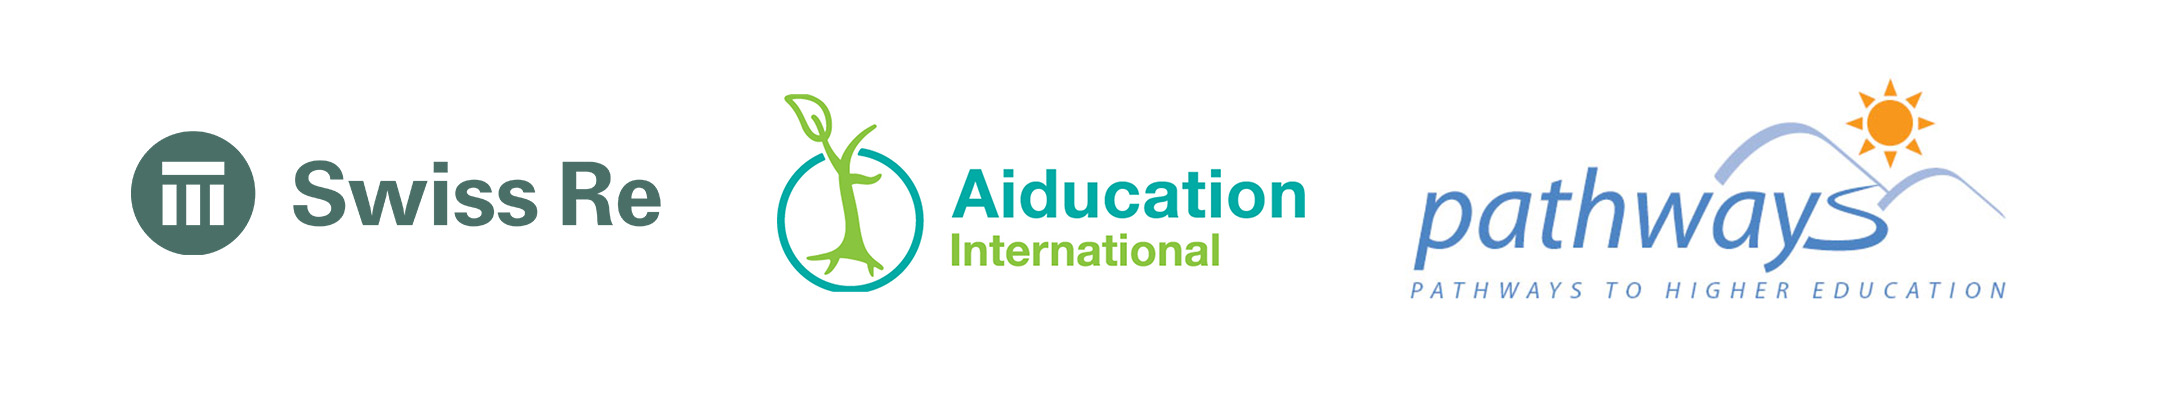 Swiss Re, Aiducation International, and Pathways' to Higher Education Logos